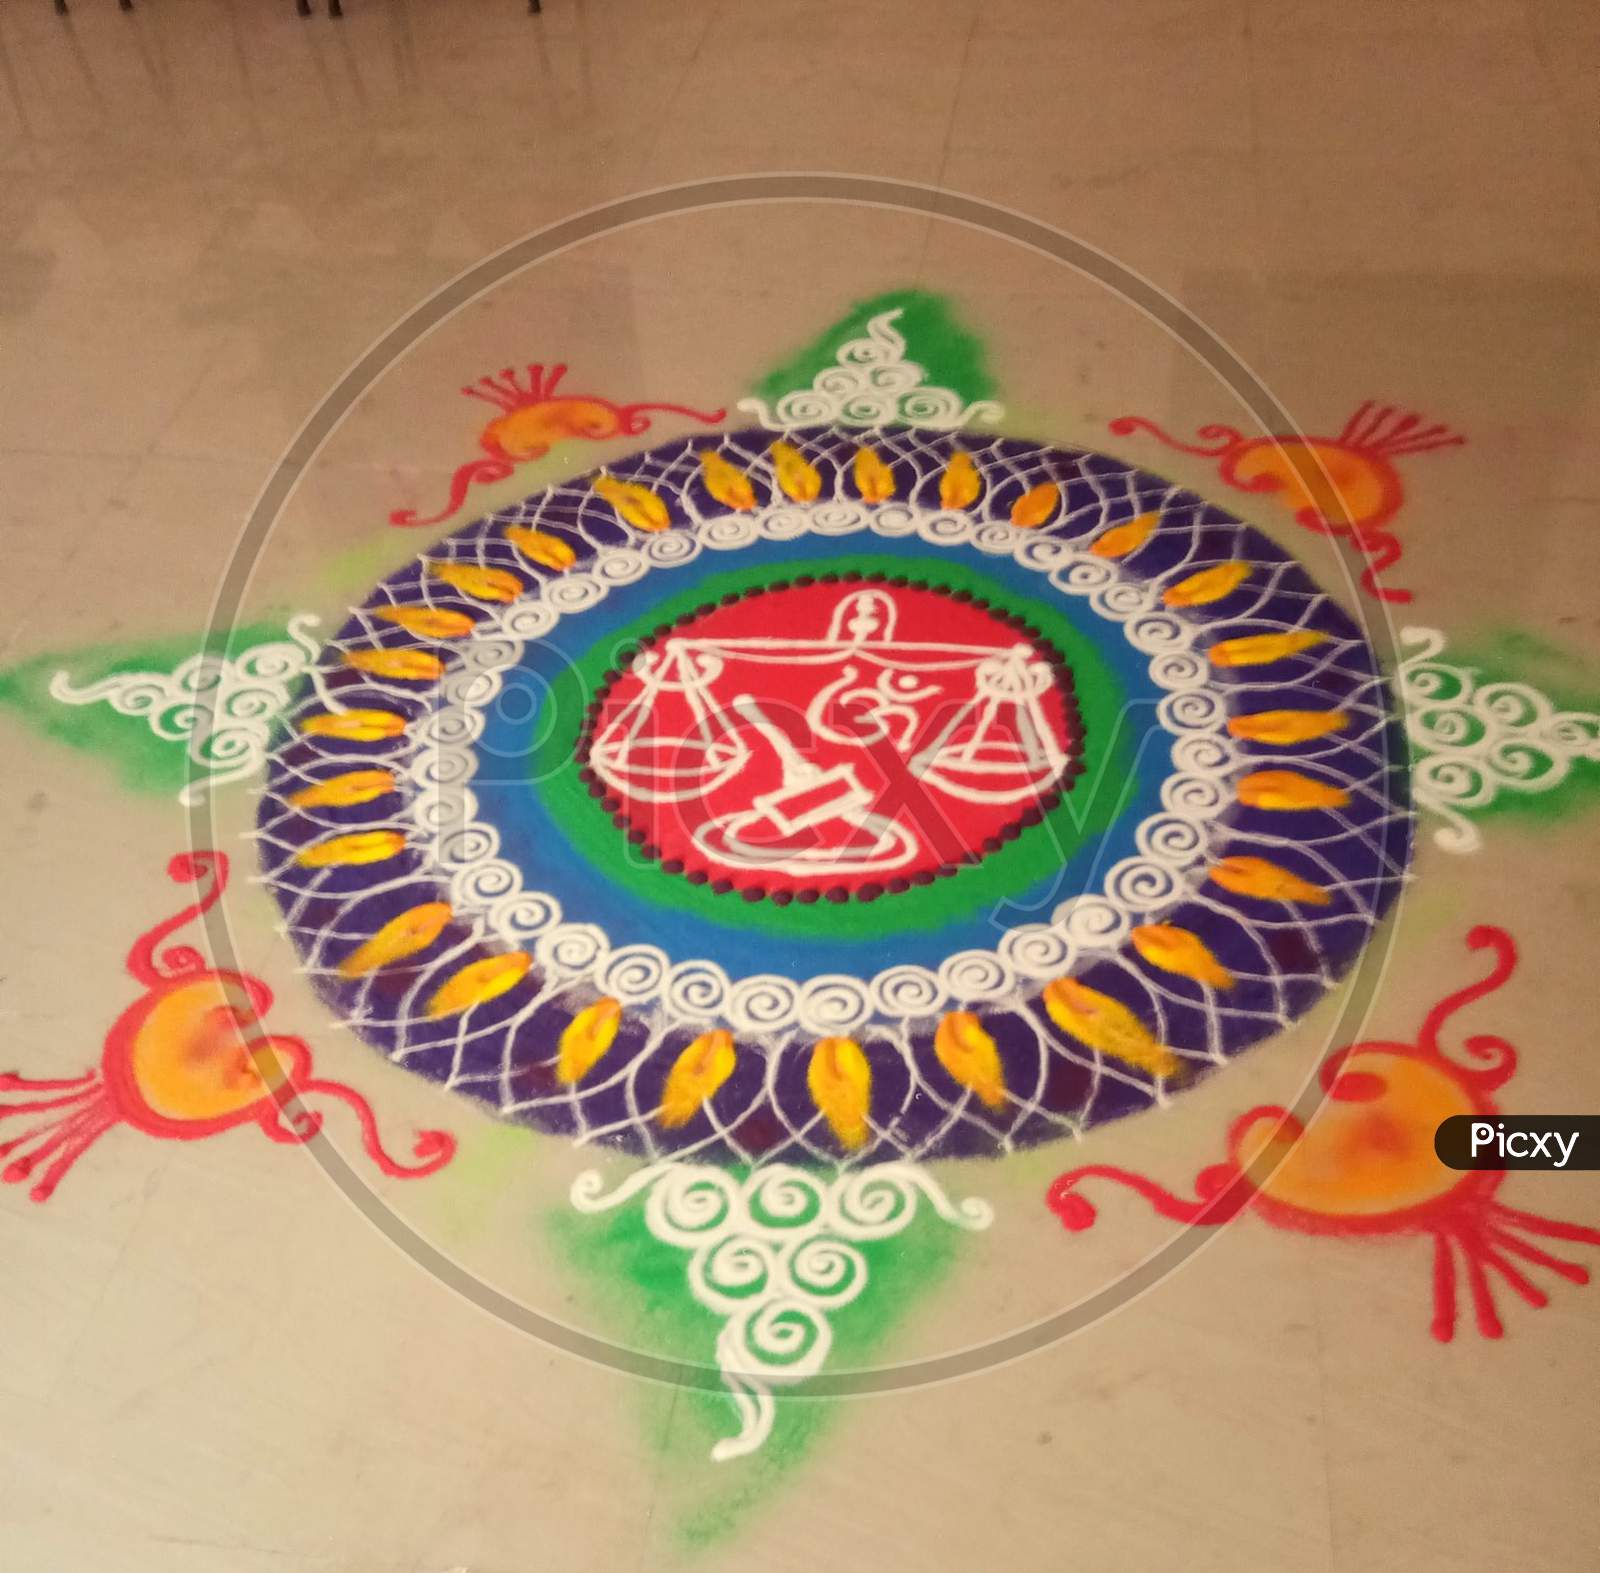 Beautiful Rangoli with message of Law and justice.India.